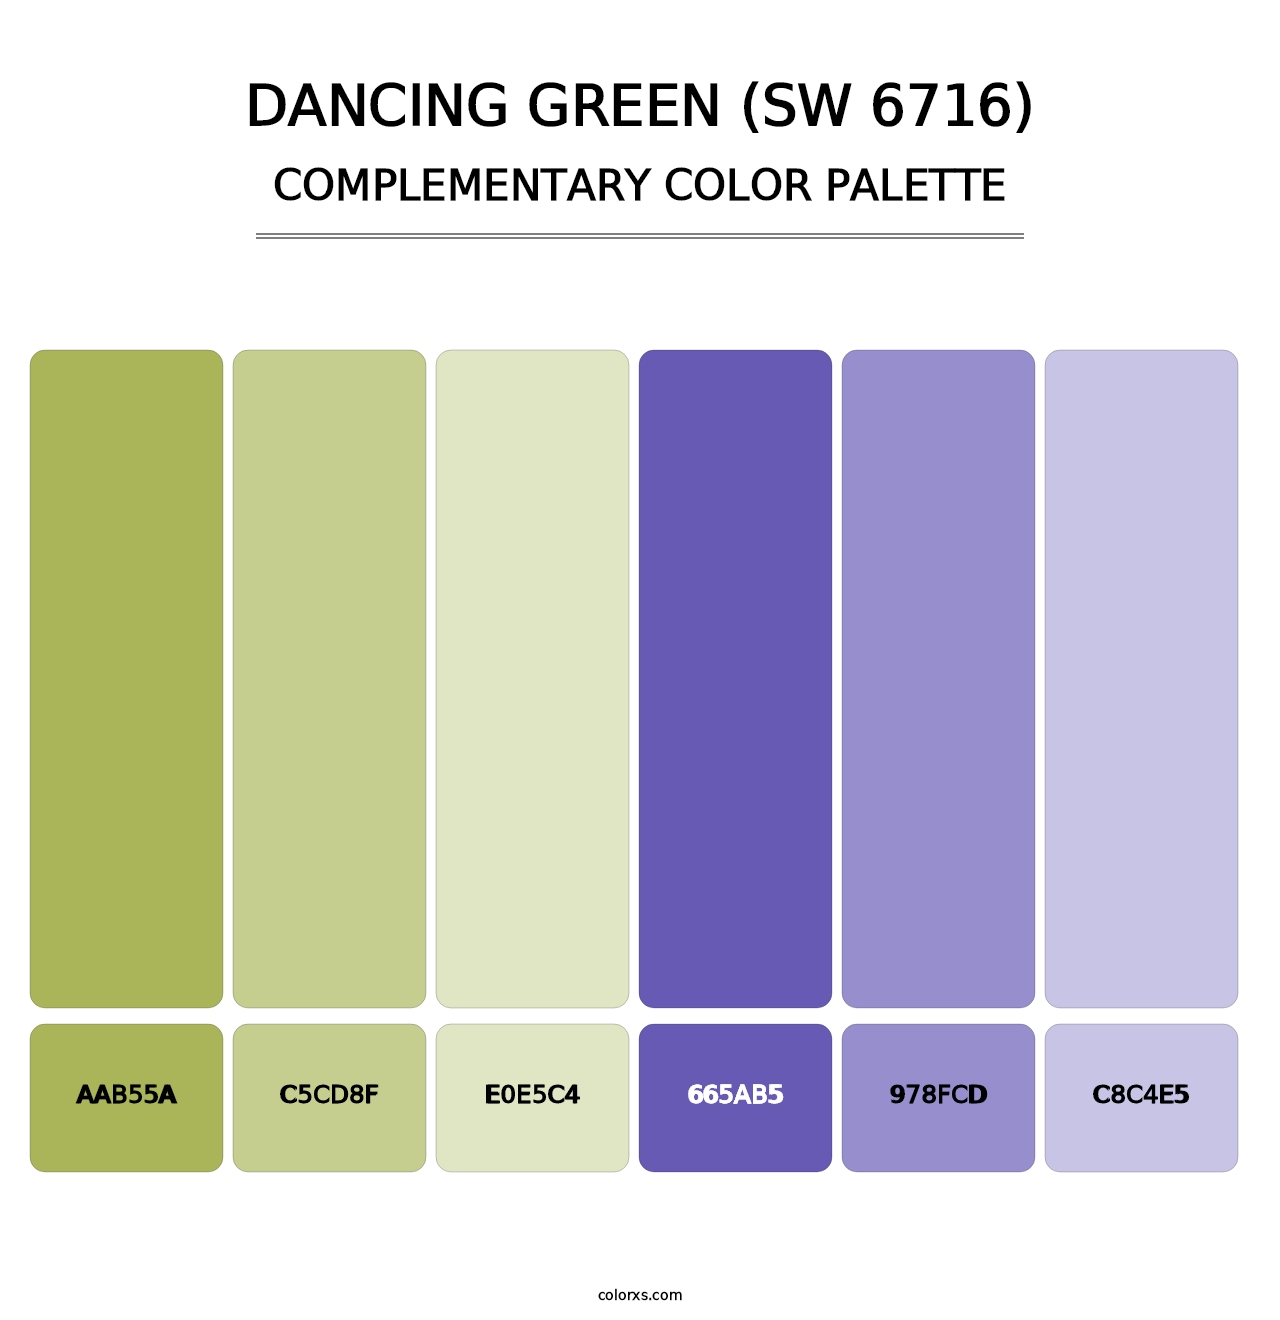 Dancing Green (SW 6716) - Complementary Color Palette